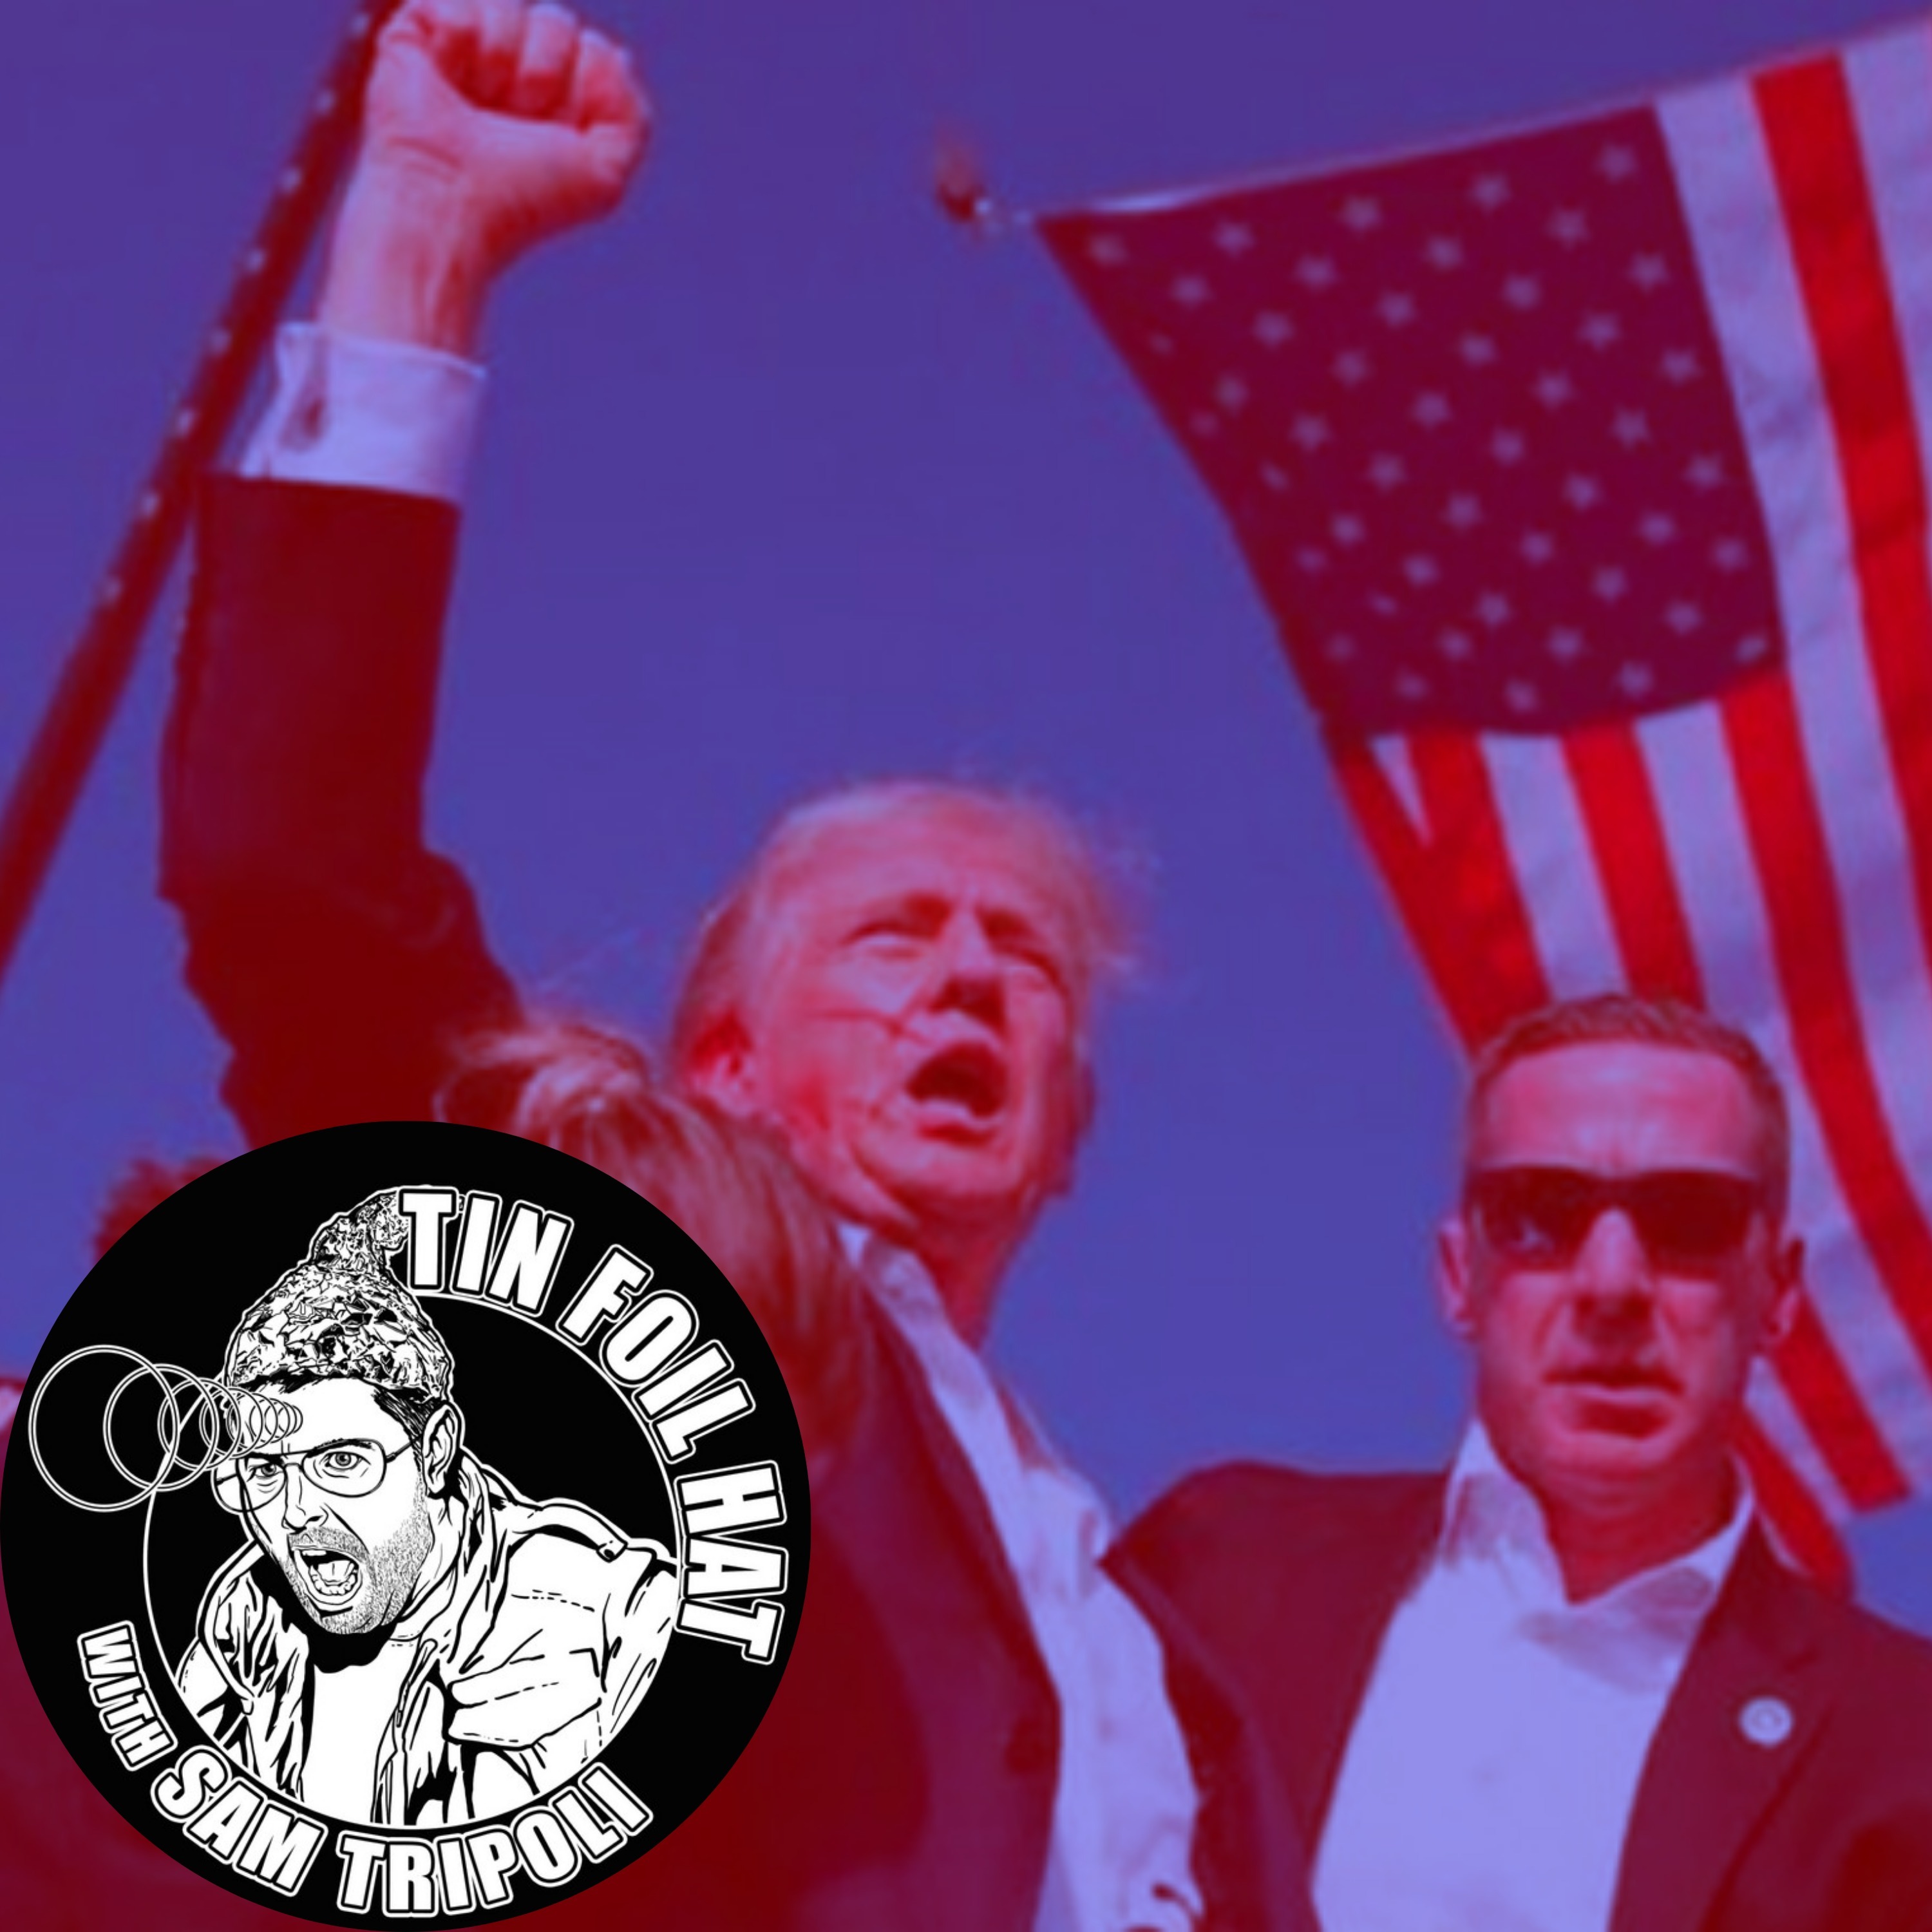 SWAPCAST - TFH #793 The Assassination Attempt on Donald Trump with Brad Binkley and Mark Steeves